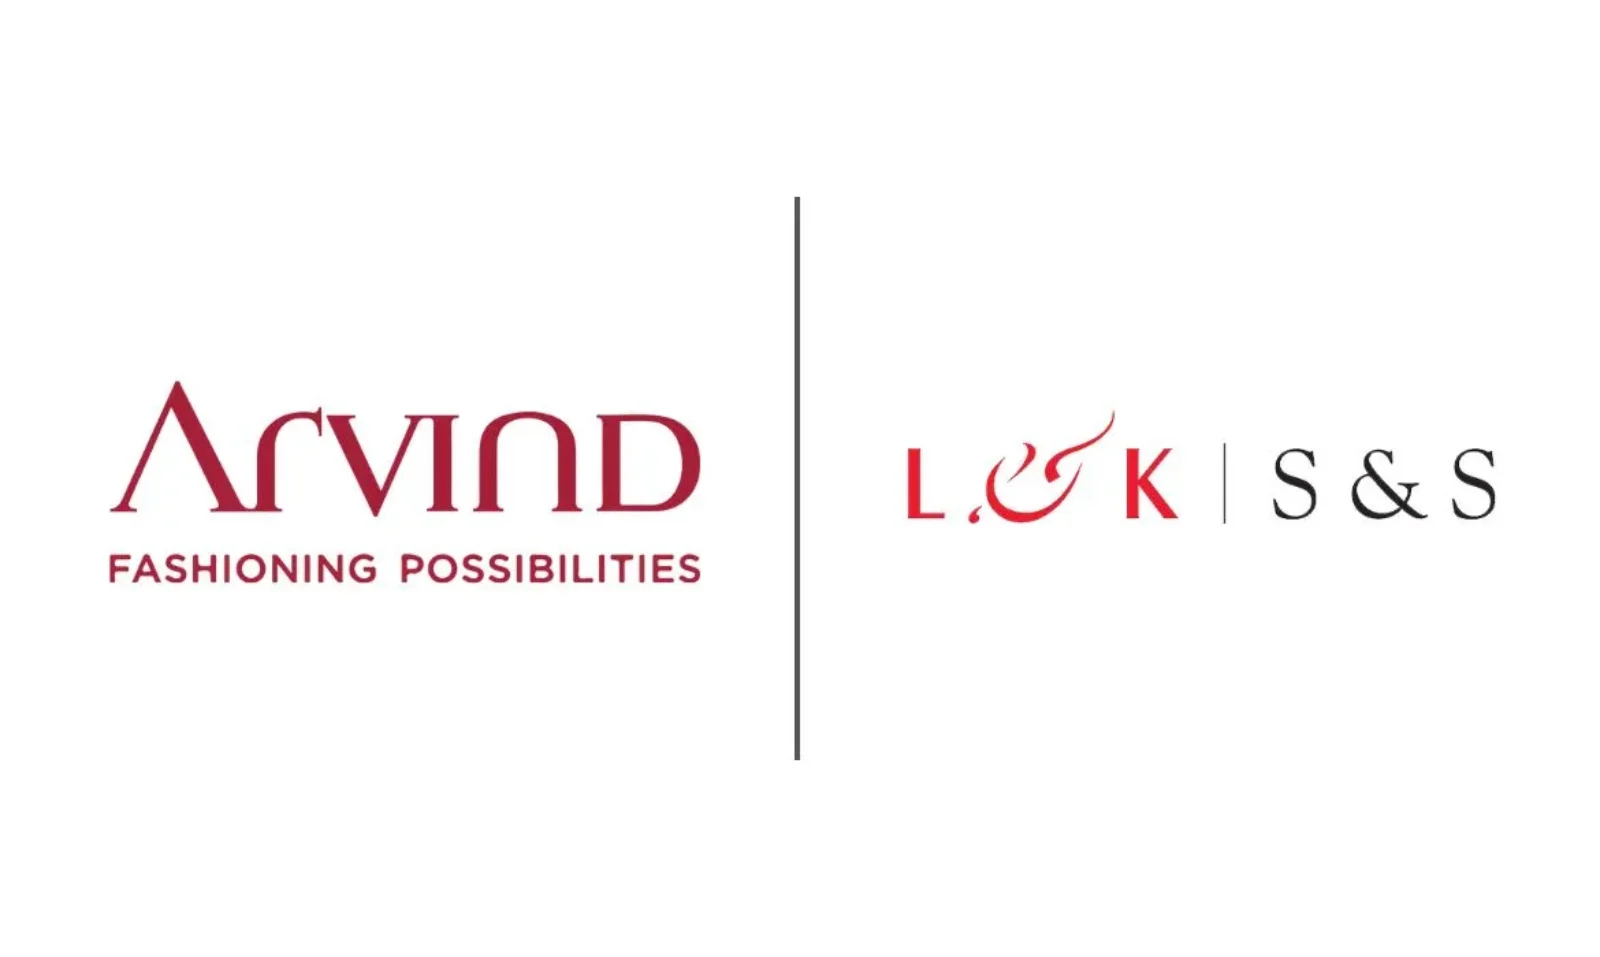 Arvind Limited, L&K Saatchi & Saatchi, fiber-to-fashion, strategic partner, consumer connections, innovative campaigns, market strategy, textile-to-retail, global supplier, fabric, technology, Omni-channel commerce,